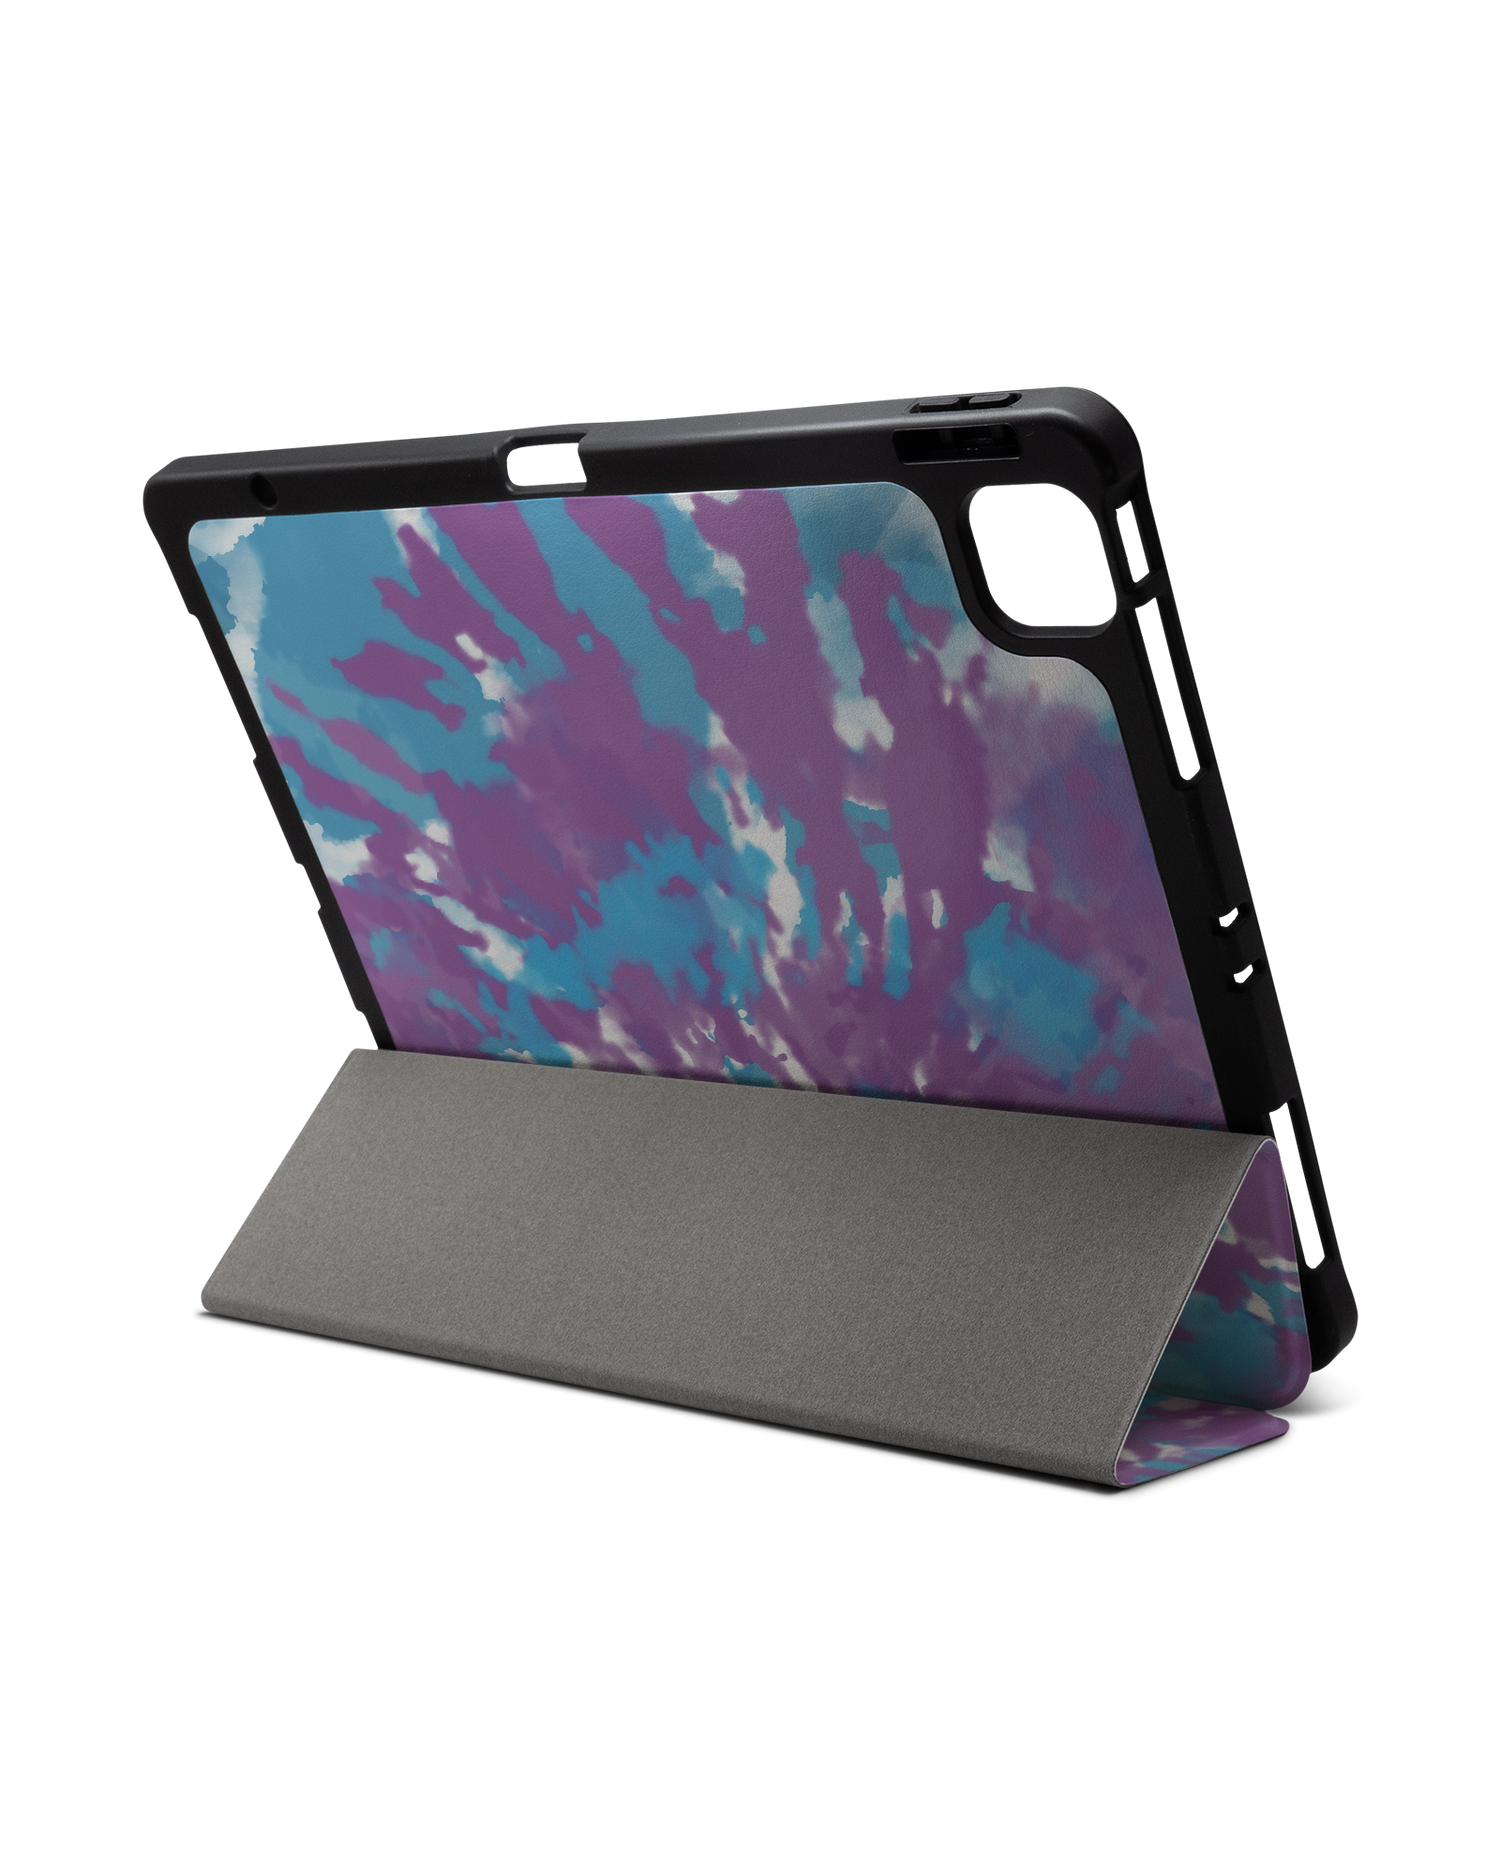 Classic Tie Dye iPad Case with Pencil Holder for Apple iPad Pro 6 12.9